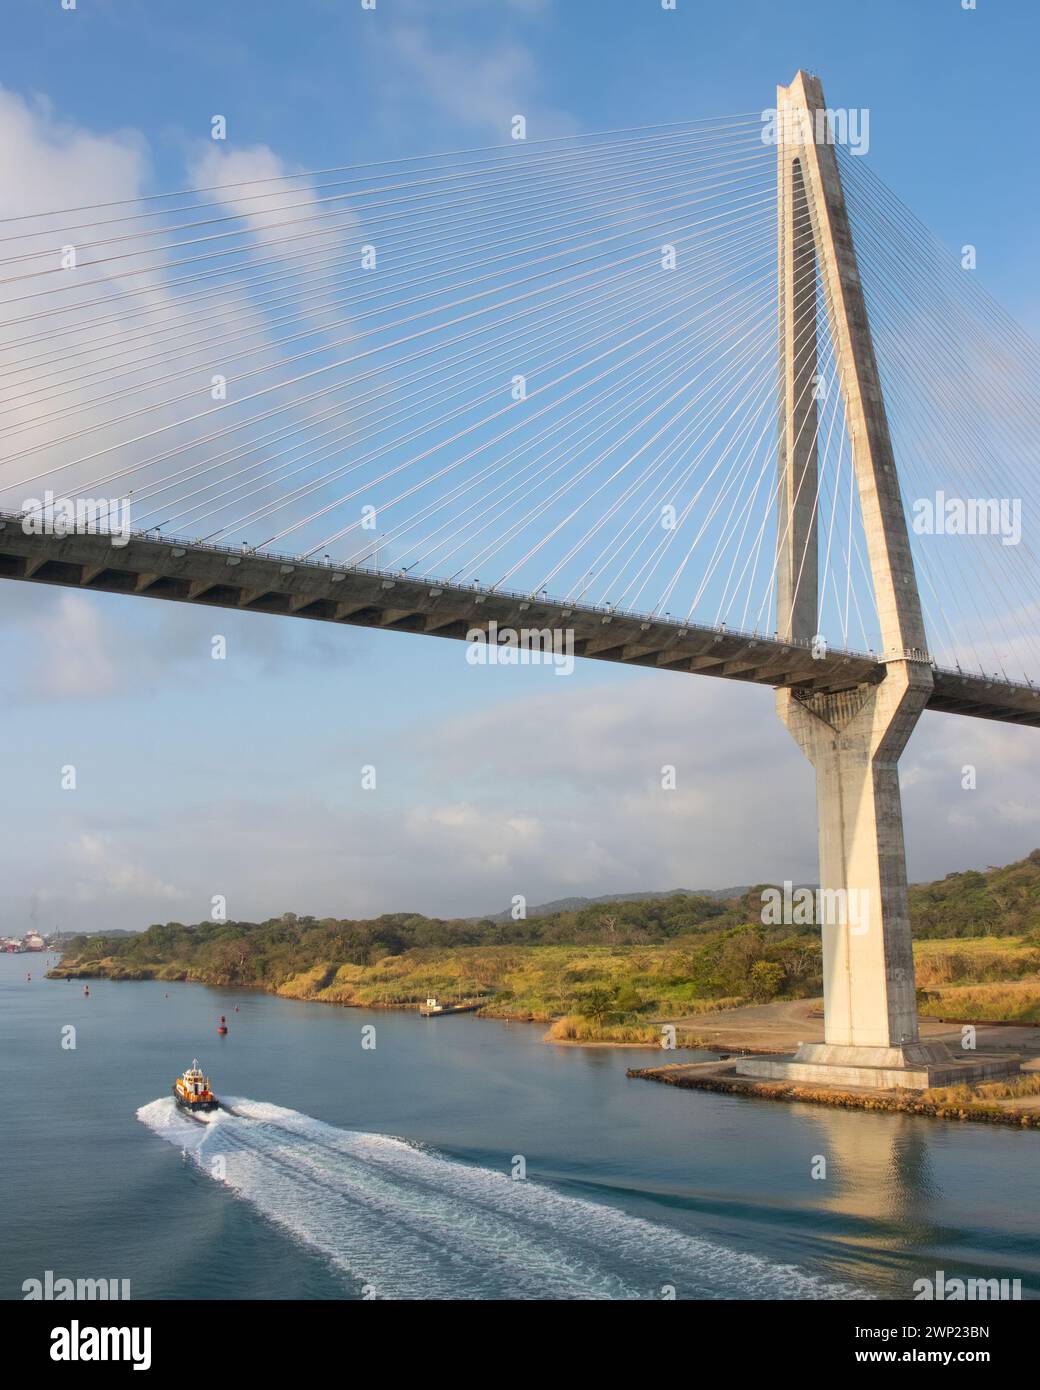 Small boat passed underneath the large impressive Atlantic Bridge at Colon Panama at start of the Panama Canal set against blue sky low water levels Stock Photo